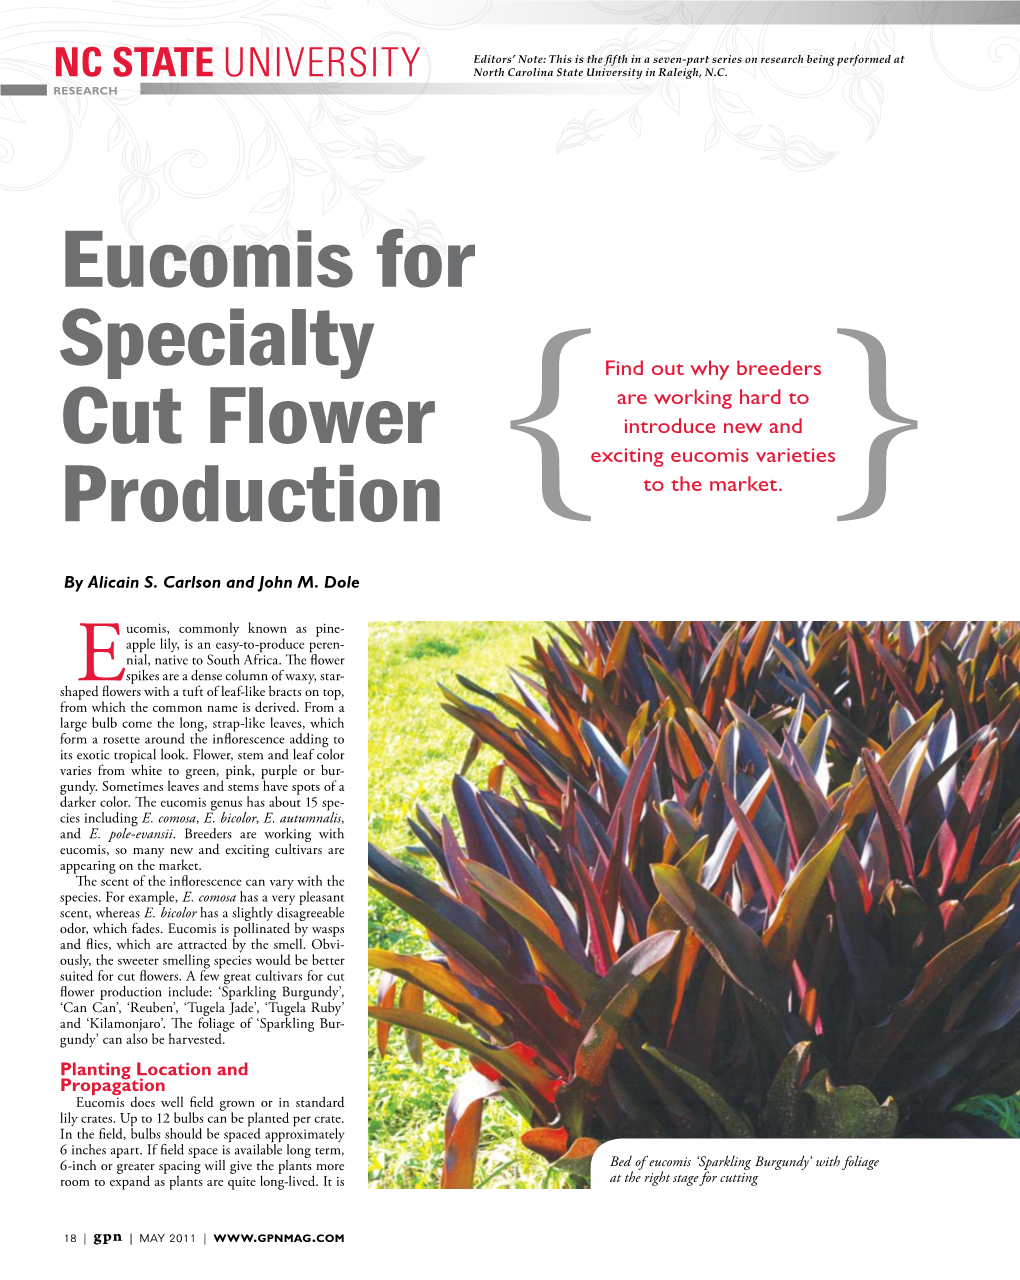 Eucomis for Specialty Cut Flower Production